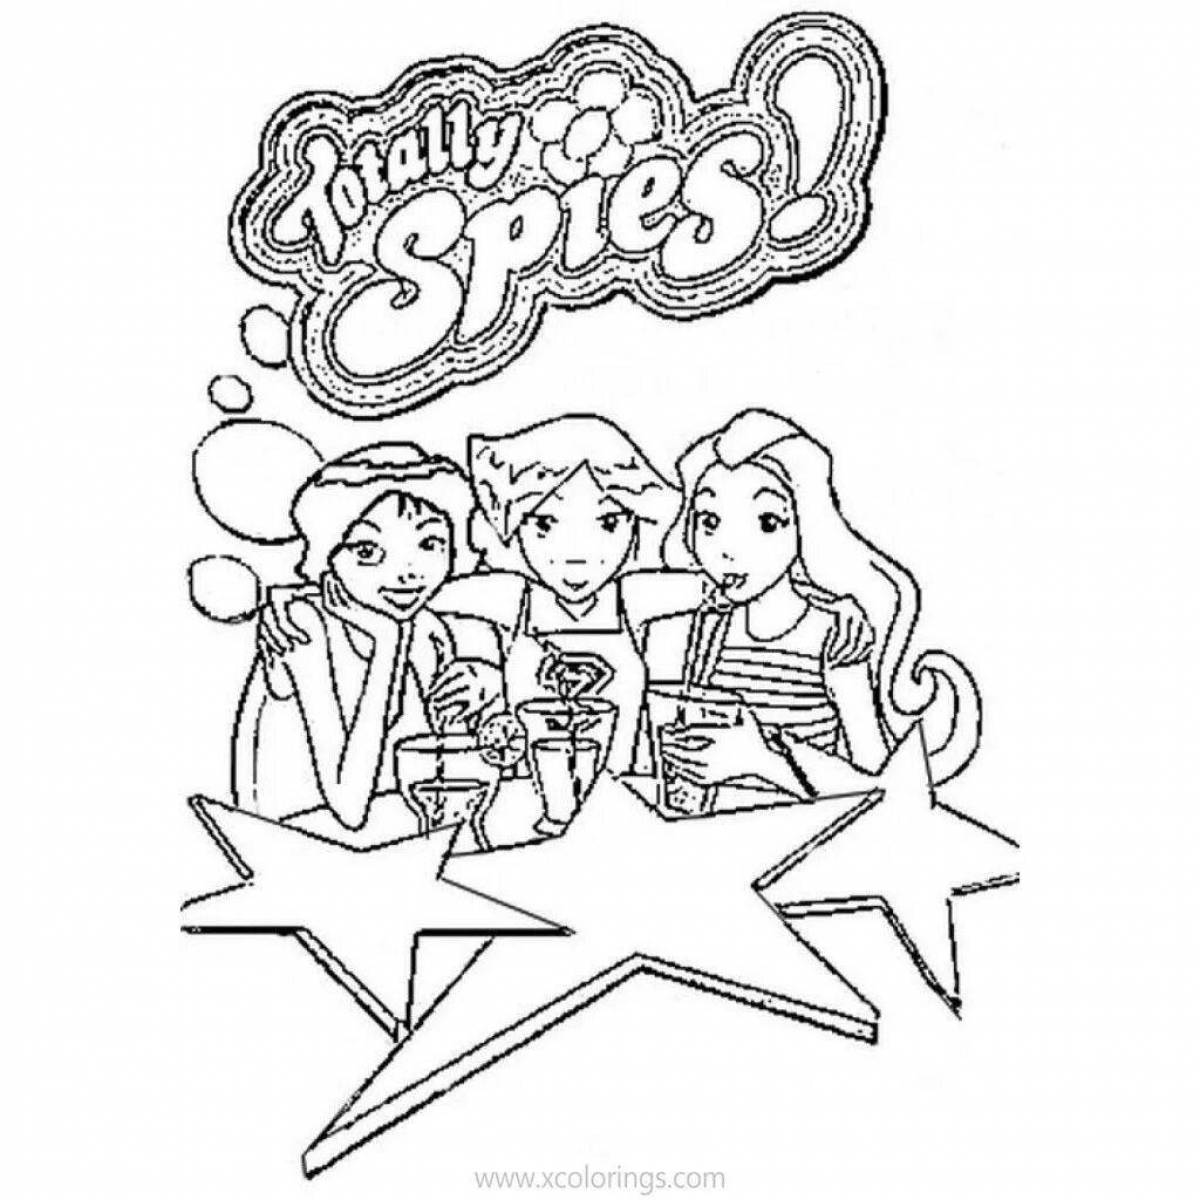 Spy Kids coloring page